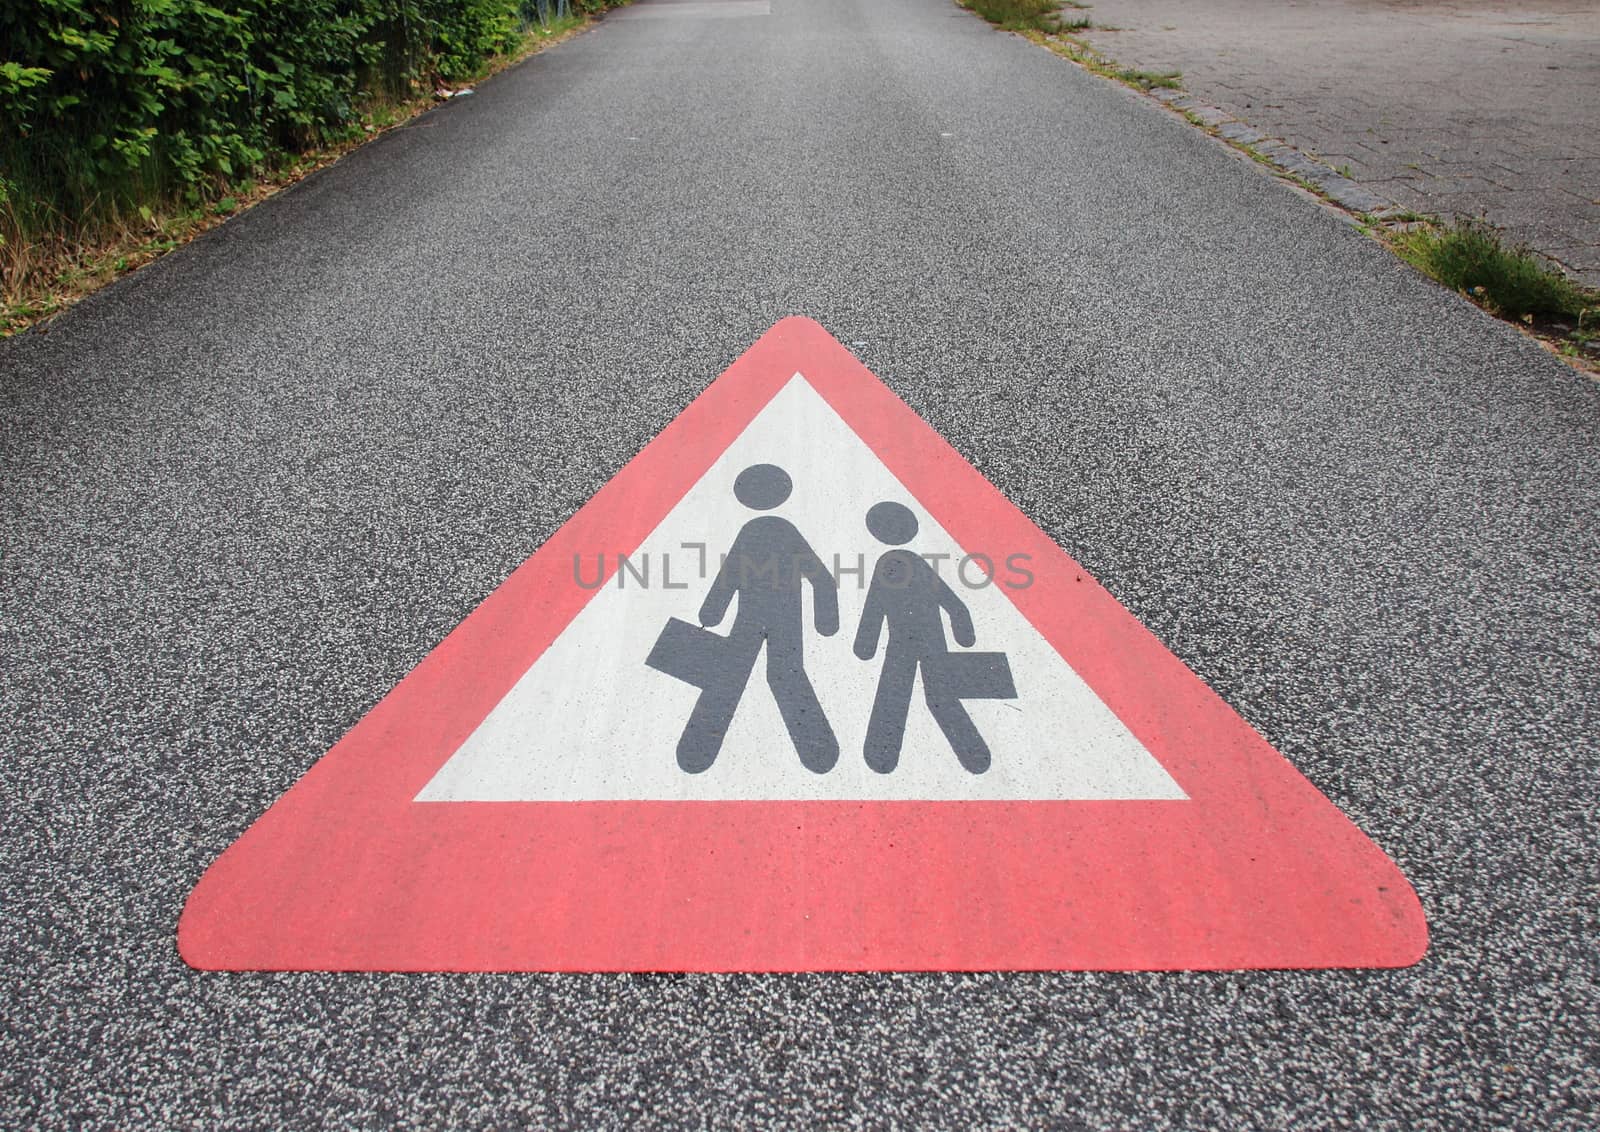 Sign on asphalt road with school or working person